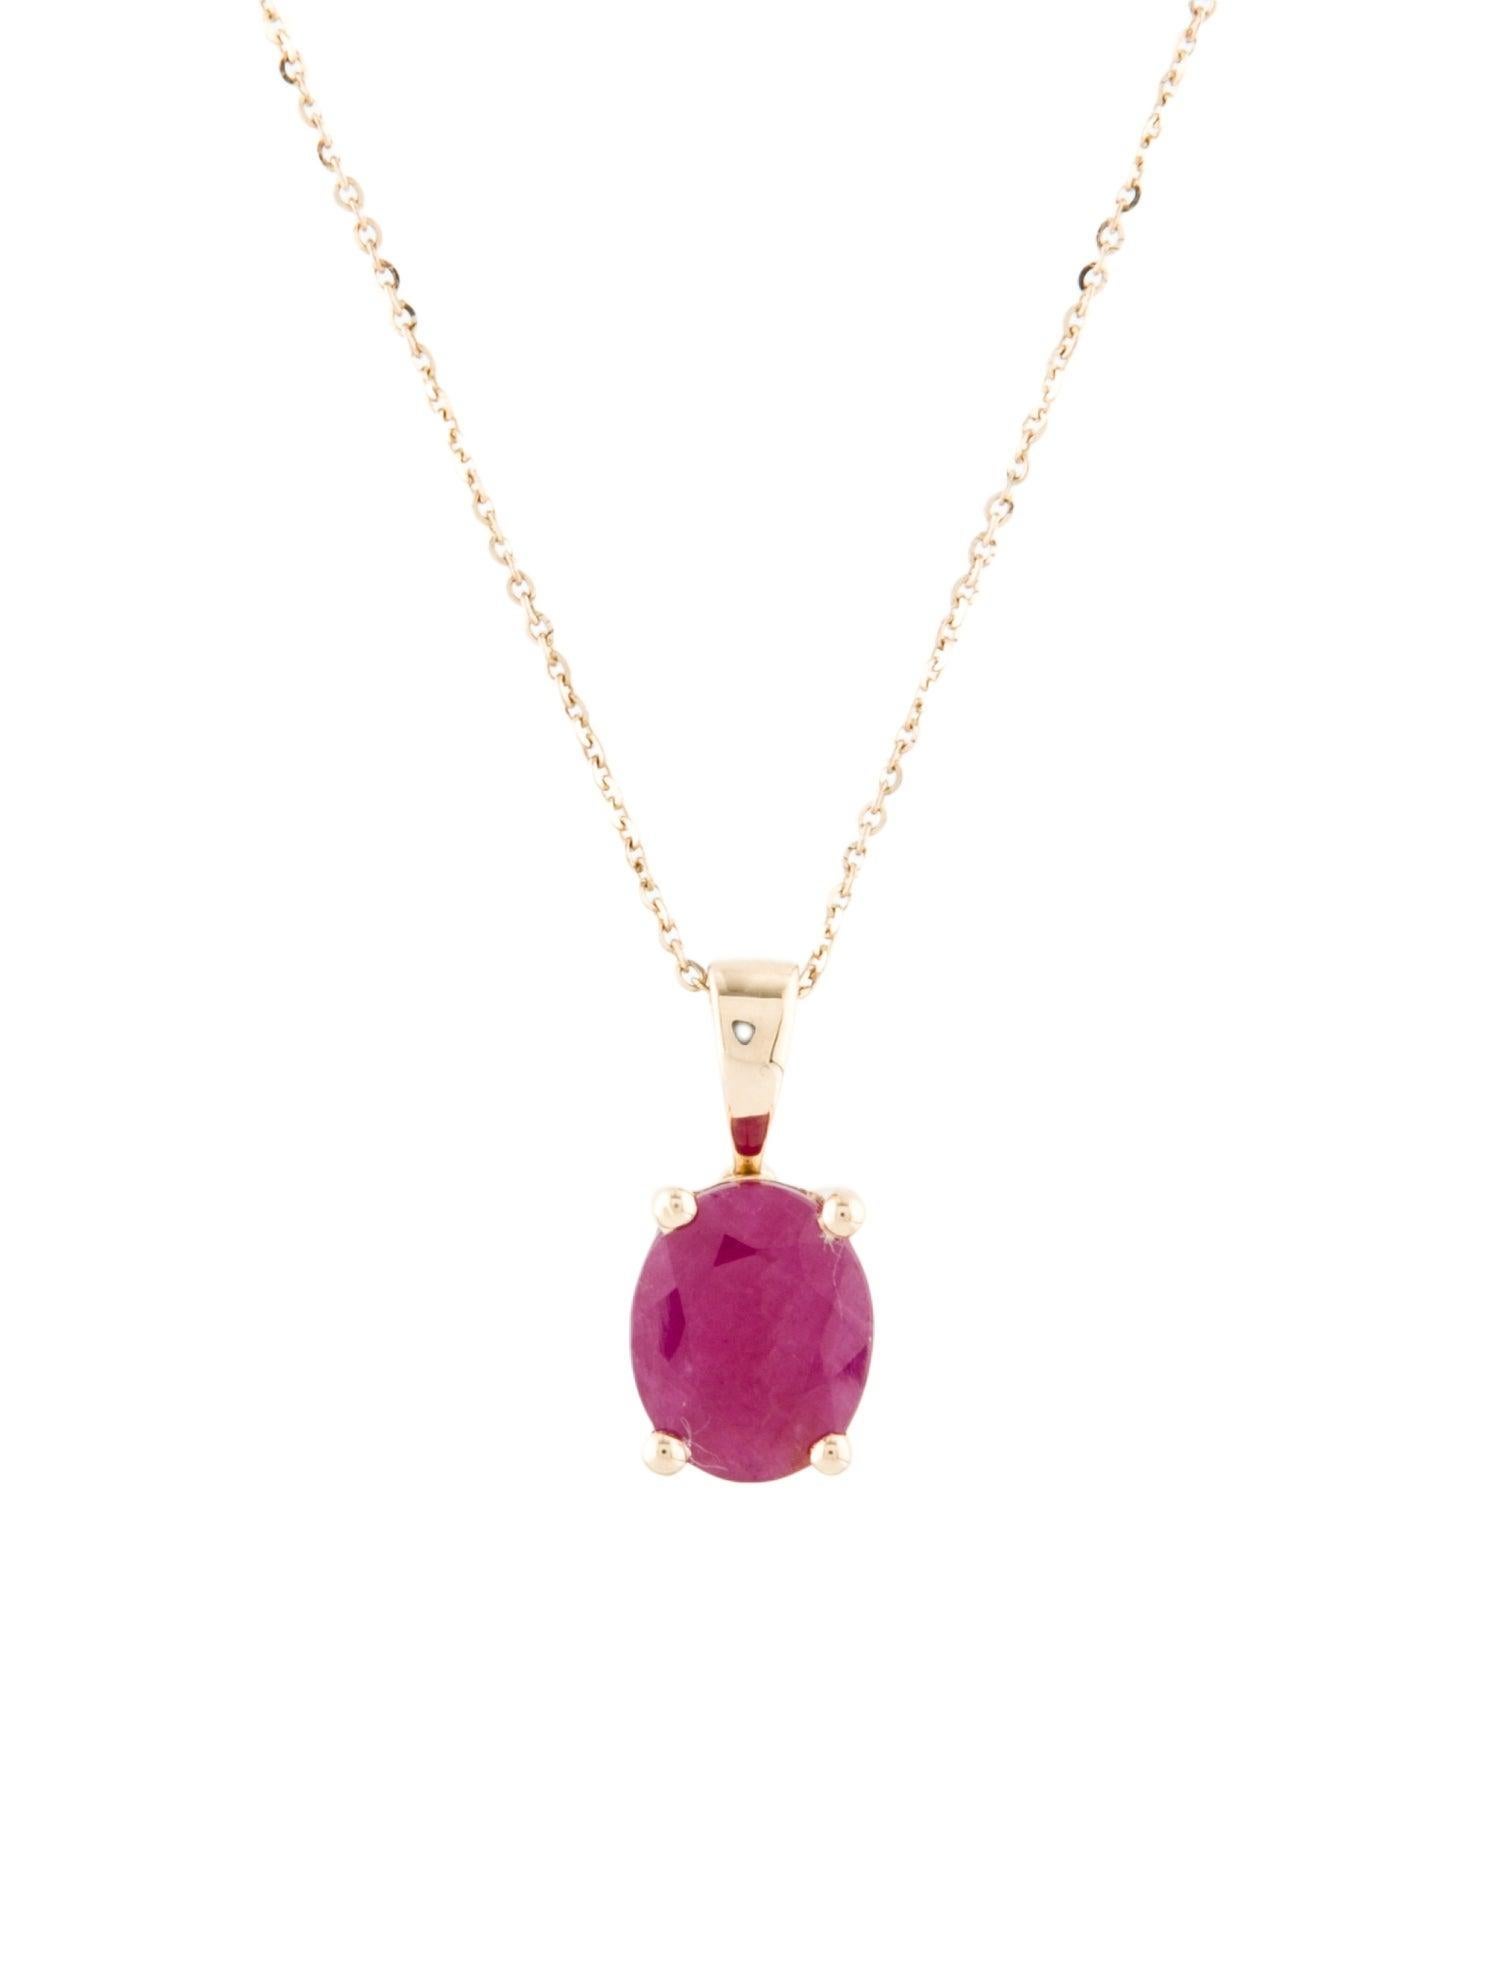 Introducing our exquisite 14K Yellow Gold Ruby Pendant Necklace, a masterpiece of fine jewelry that exudes timeless elegance. This stunning piece features a 2.87 carat mixed cut, oval ruby with a captivating red hue and very slight brownish